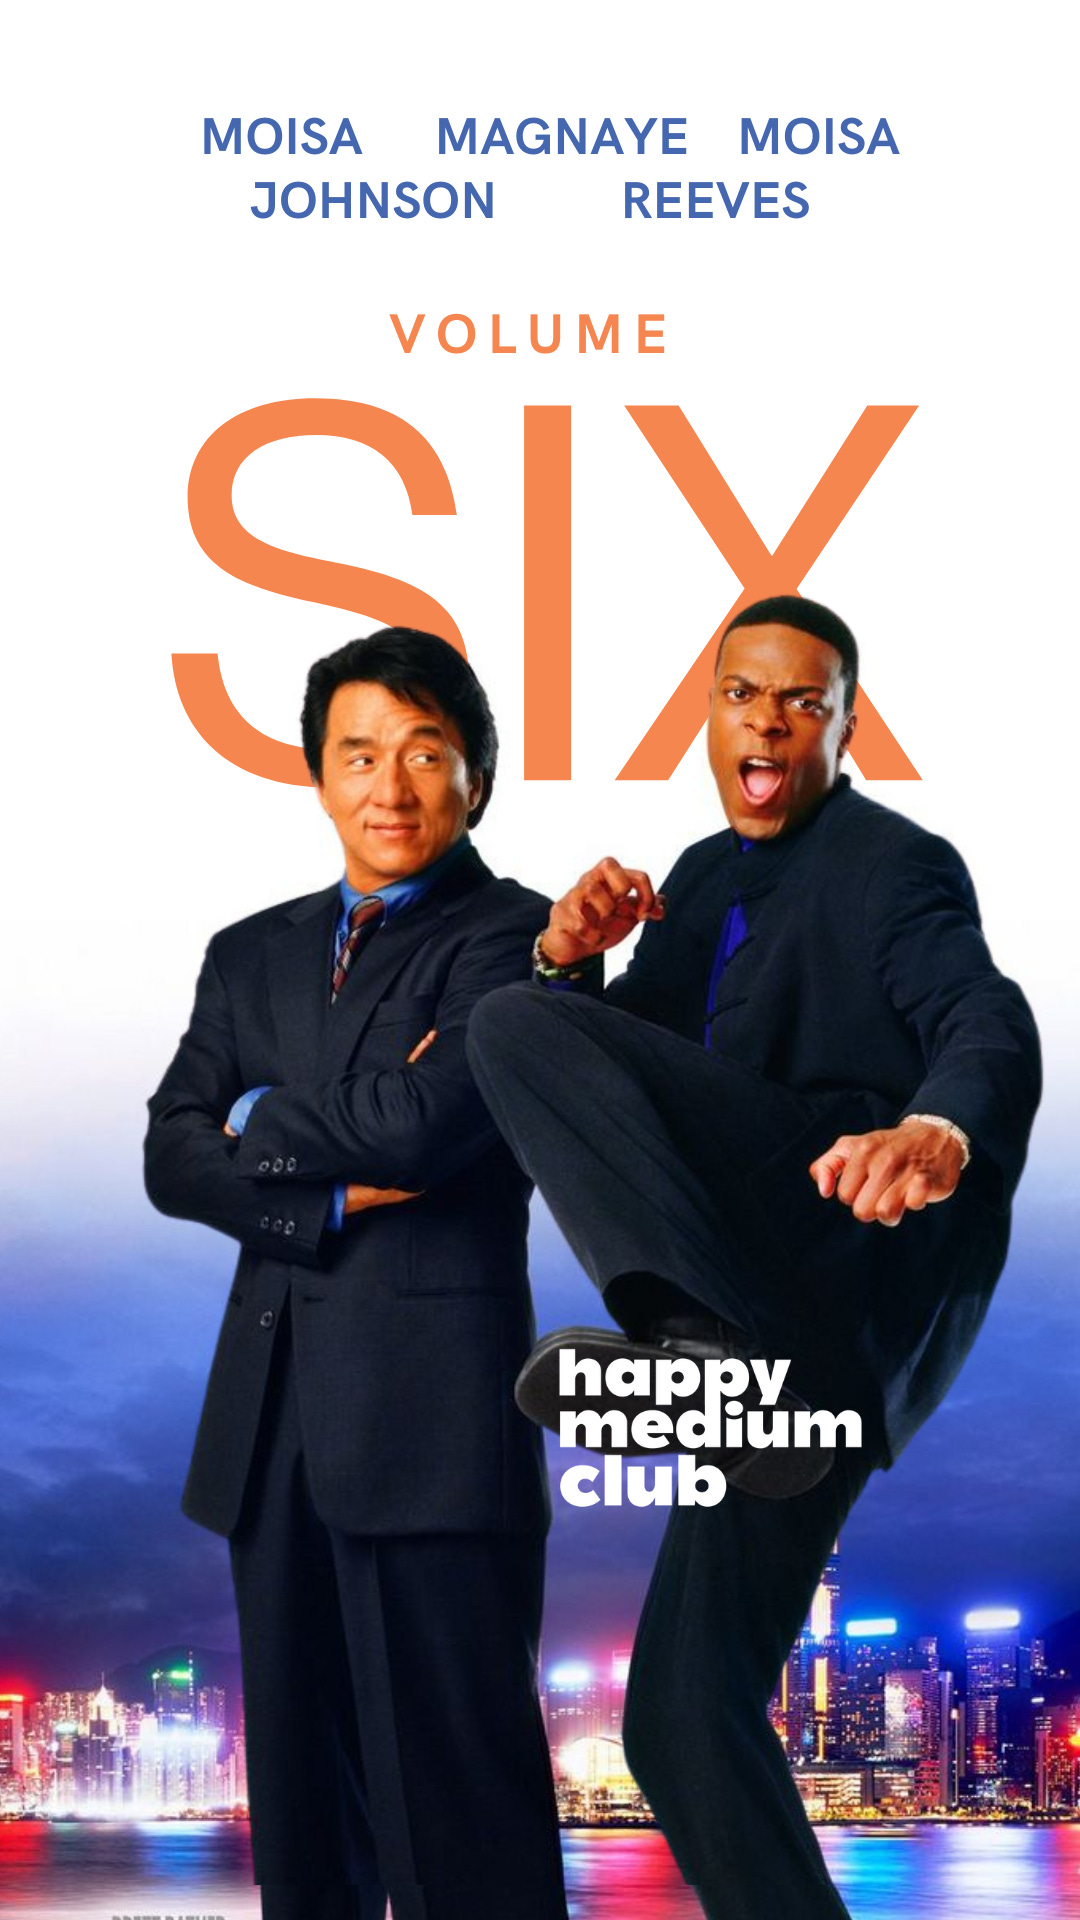 A parody of the Rush Hour poster, depicting Jackie Chan and Chris Tucker over text that says Happy Medium Club Volume 6.  Across the top, are the names "Moisa, Magnaye, Moisa, Johnson, Reeves."